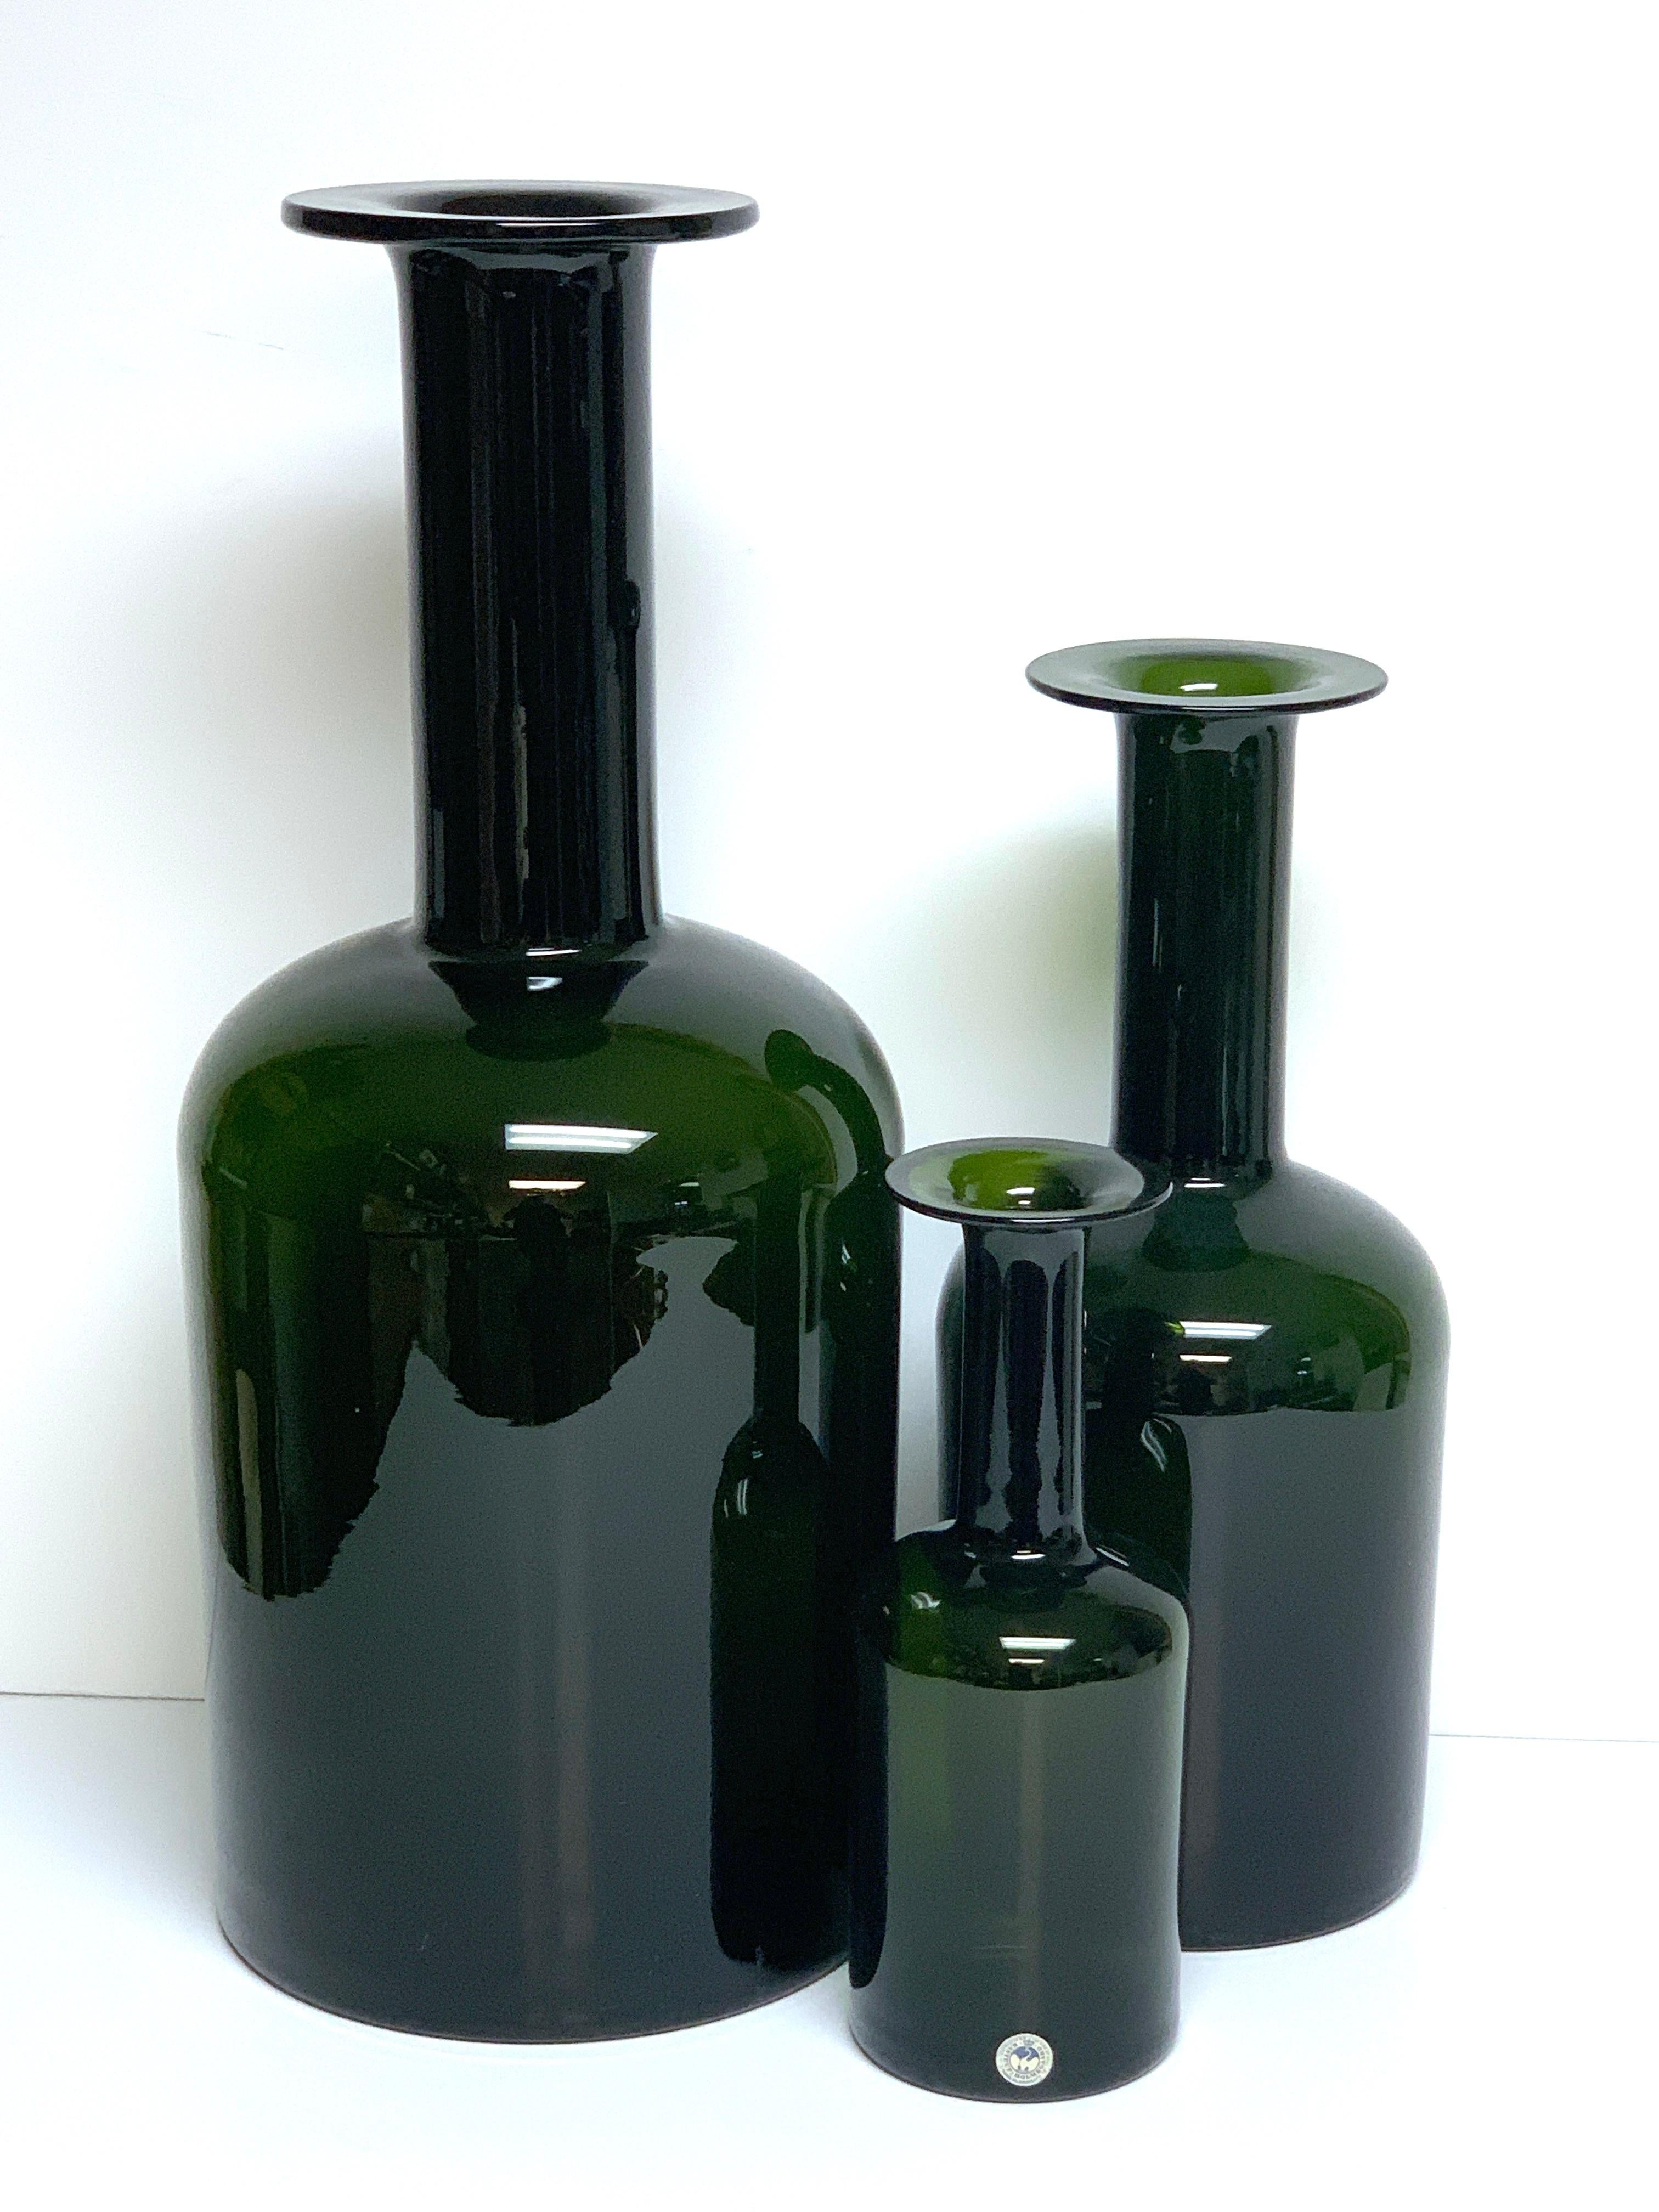 Three graduating olive glass bottle vases, by Otto Brauer for Holmegaard, a substantial, rich even colored grouping measuring:
Measures: Largest 20